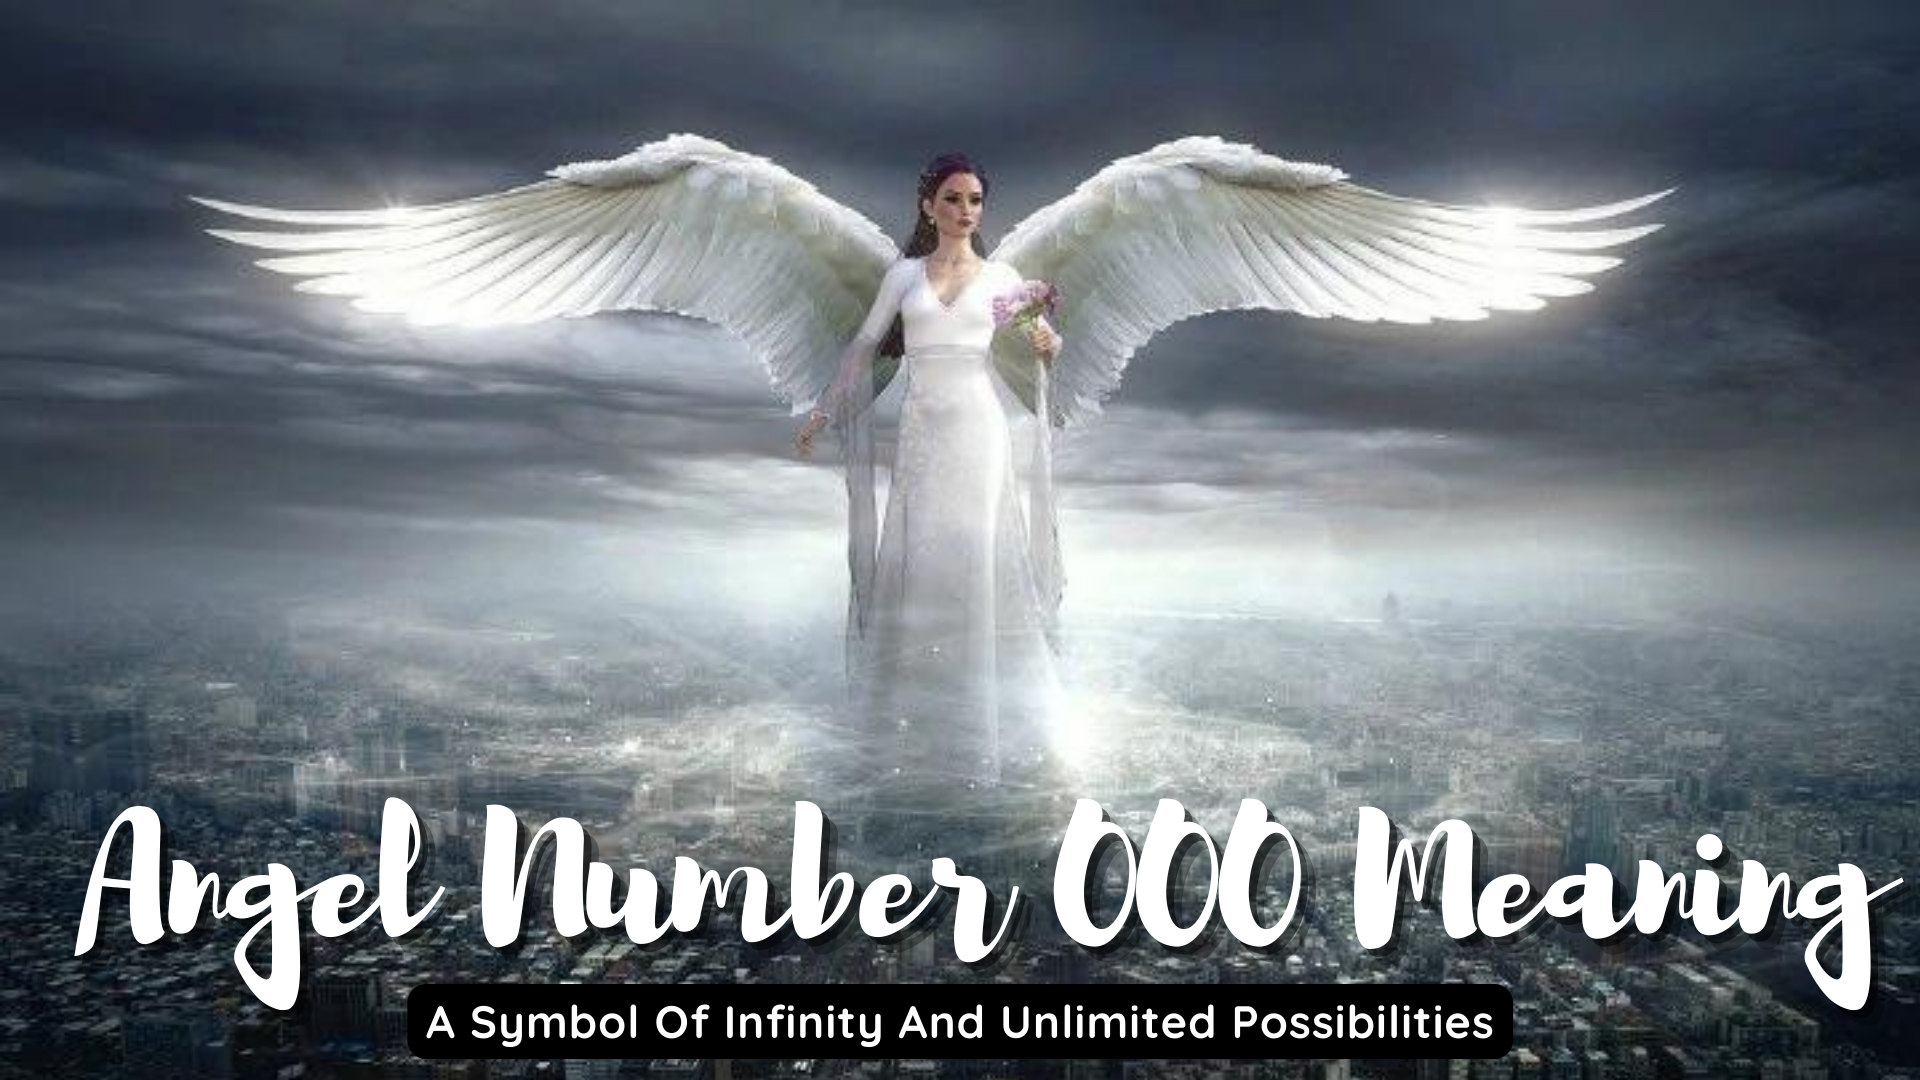 Angel Number 000 Meaning - A Symbol Of Infinite And Unlimited Possibilities